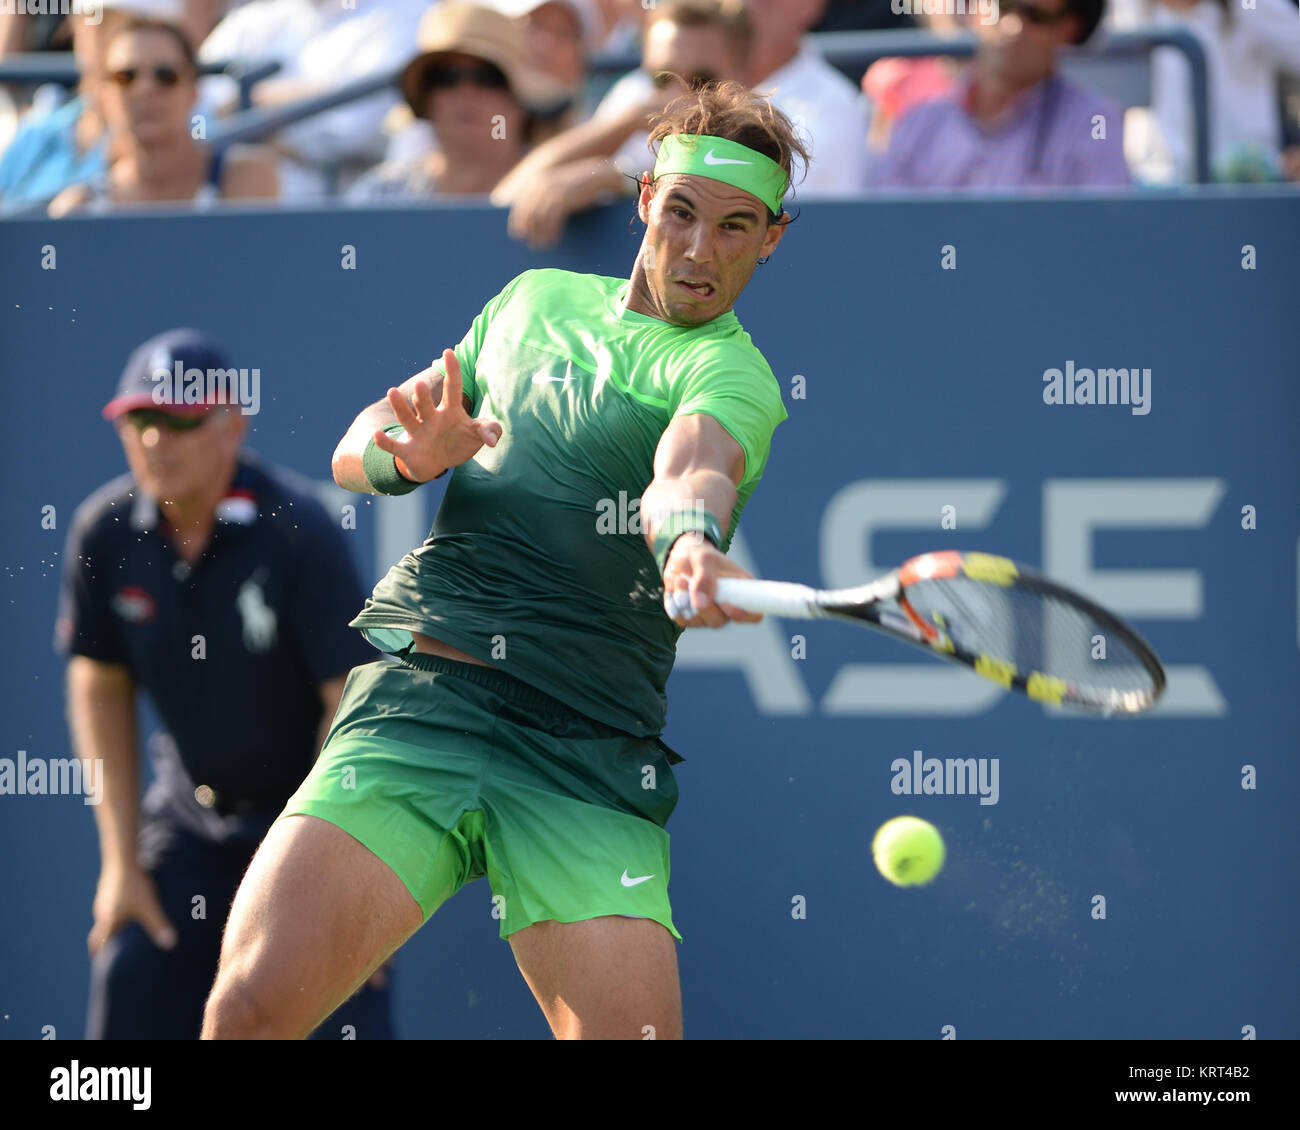 NEW YORK, NY - SEPTEMBER 02: Rafael Nadal of Spain serves defeats Diego Schwartzman of Argentina during their Men's Singles Second Round match on Day Three of the 2015 US Open at the USTA Billie Jean King National Tennis Center on September 2, 2015 in the Flushing neighborhood of the Queens borough of New York City.  People:  Rafael Nadal Stock Photo